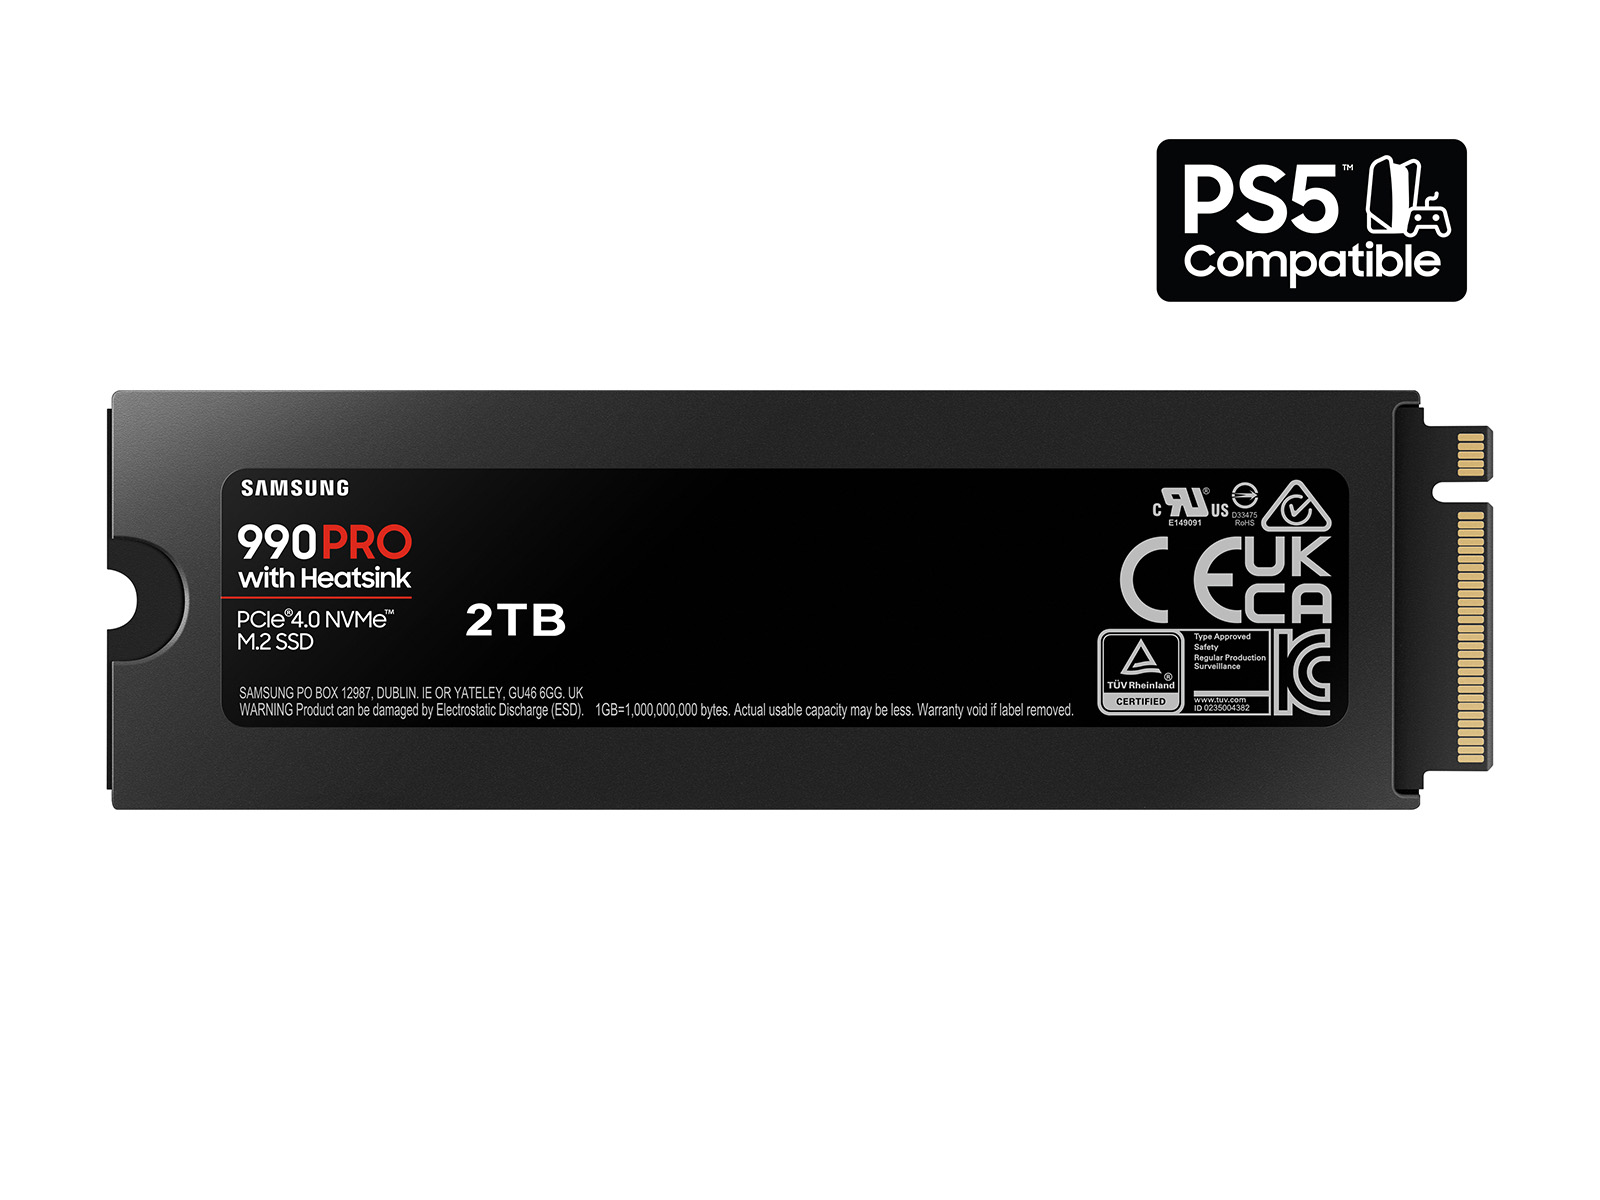 SAMSUNG 990 PRO W/ Heatsink PCIe®4.0 NVMe™ Solid State Drive 1TB 2TB, M.2  2280 NVMe™ 2.0 SSD Internal Solid State Hard Disk Drive For Laptop PC  Desktop, Up To 7450MB/S